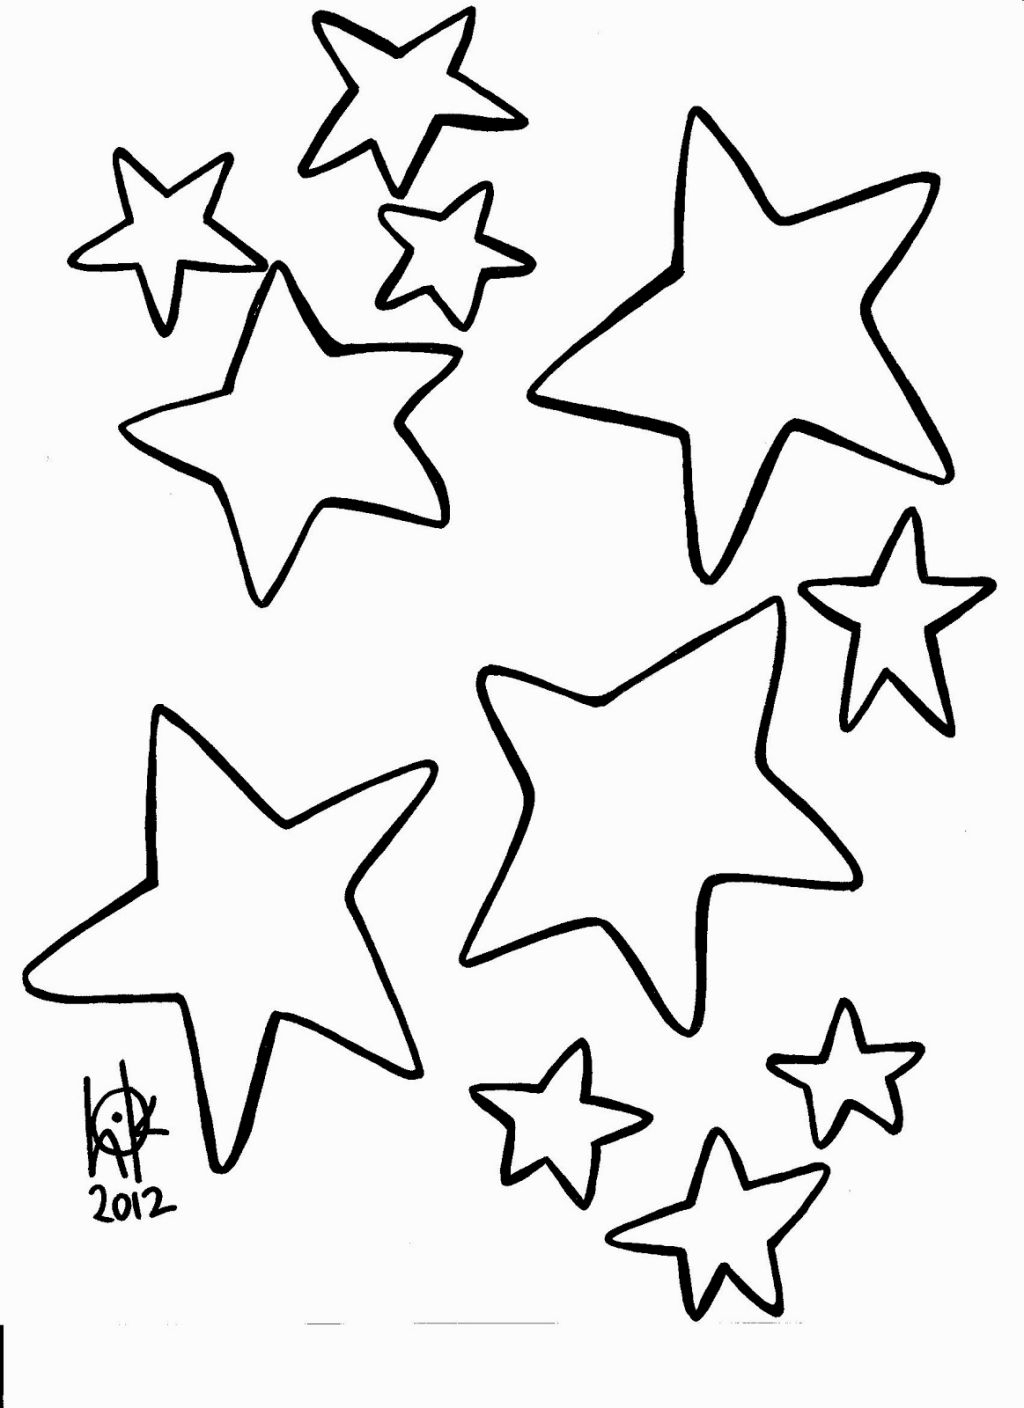 Coloring Page Of A Star Coloring Page Star Coloring Pages